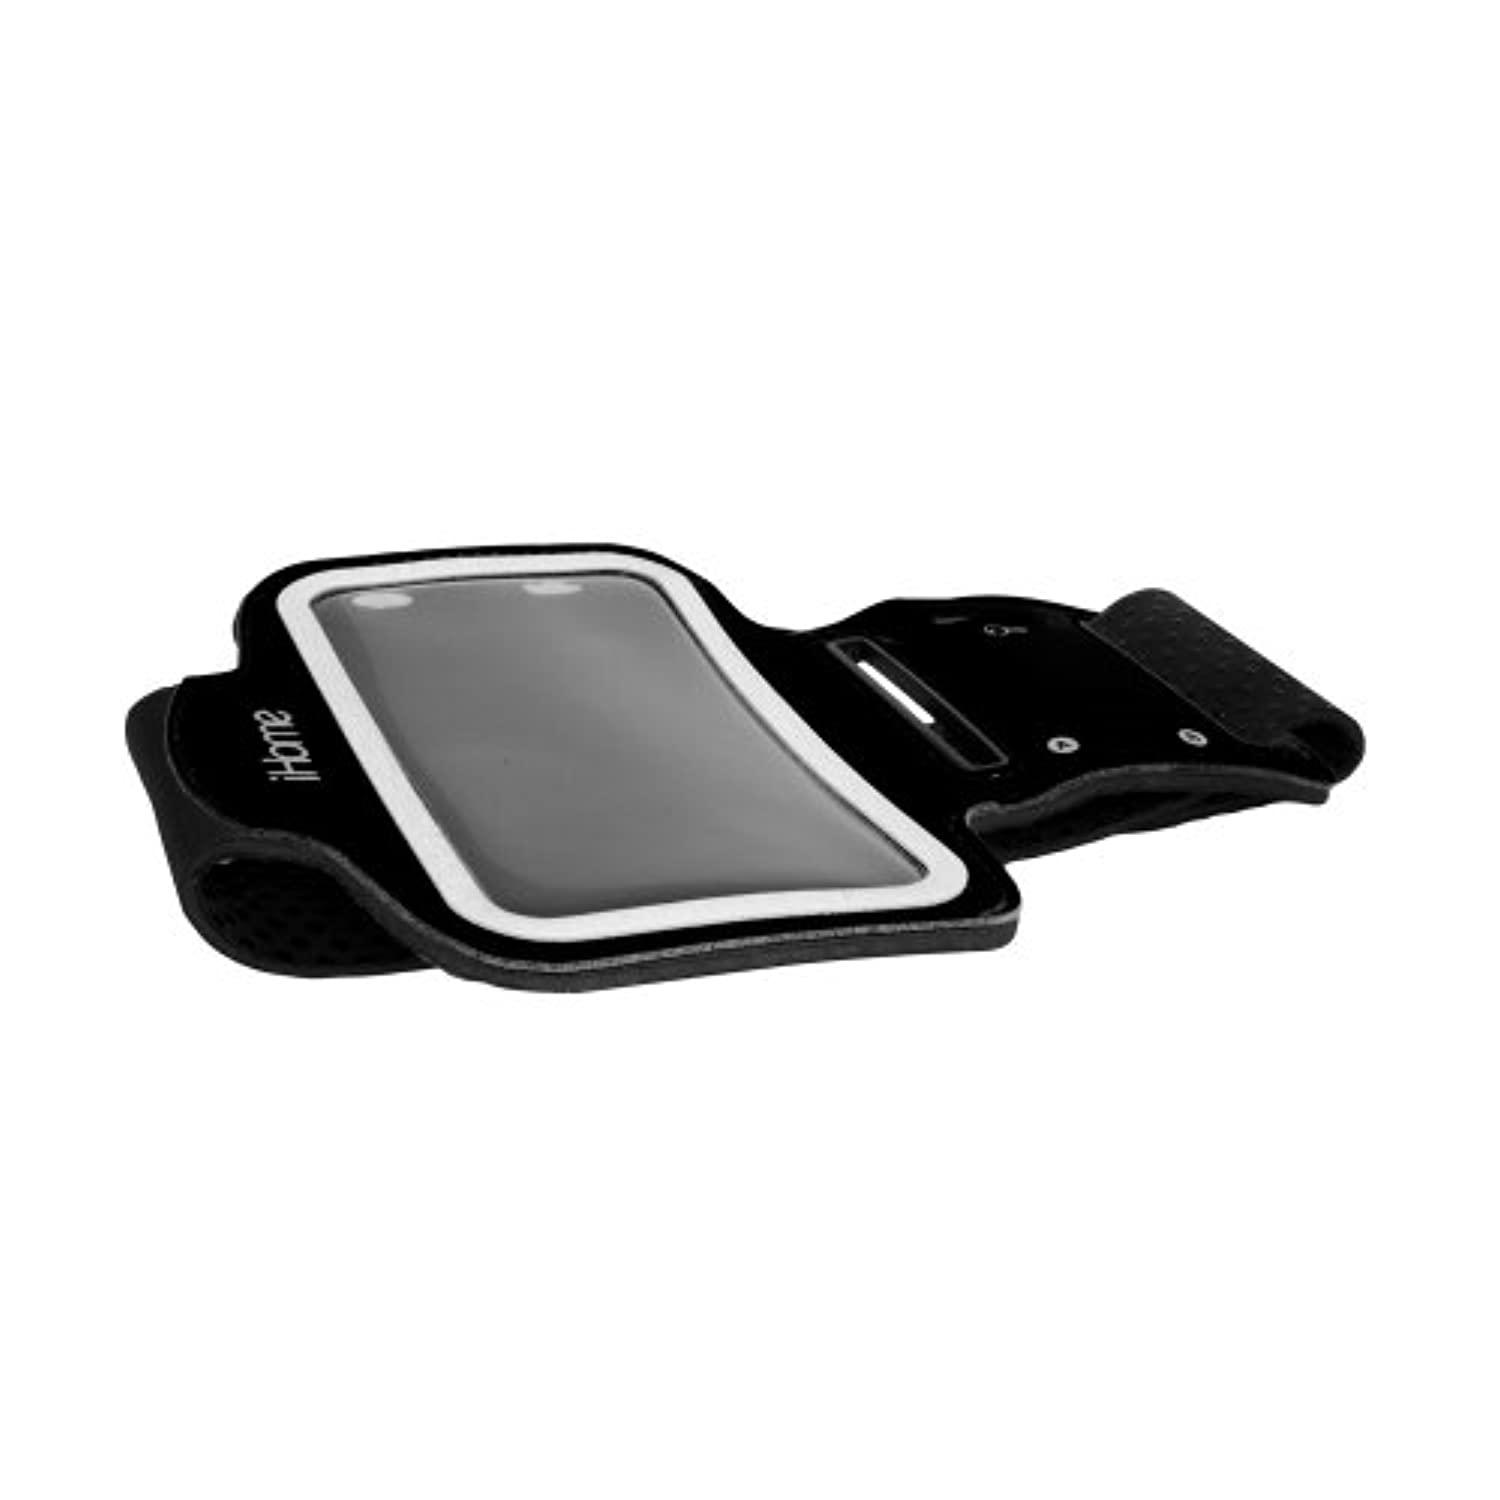 ihome ih-5p141b sport armband for iphone 4/4s/5 and ipod touch, black